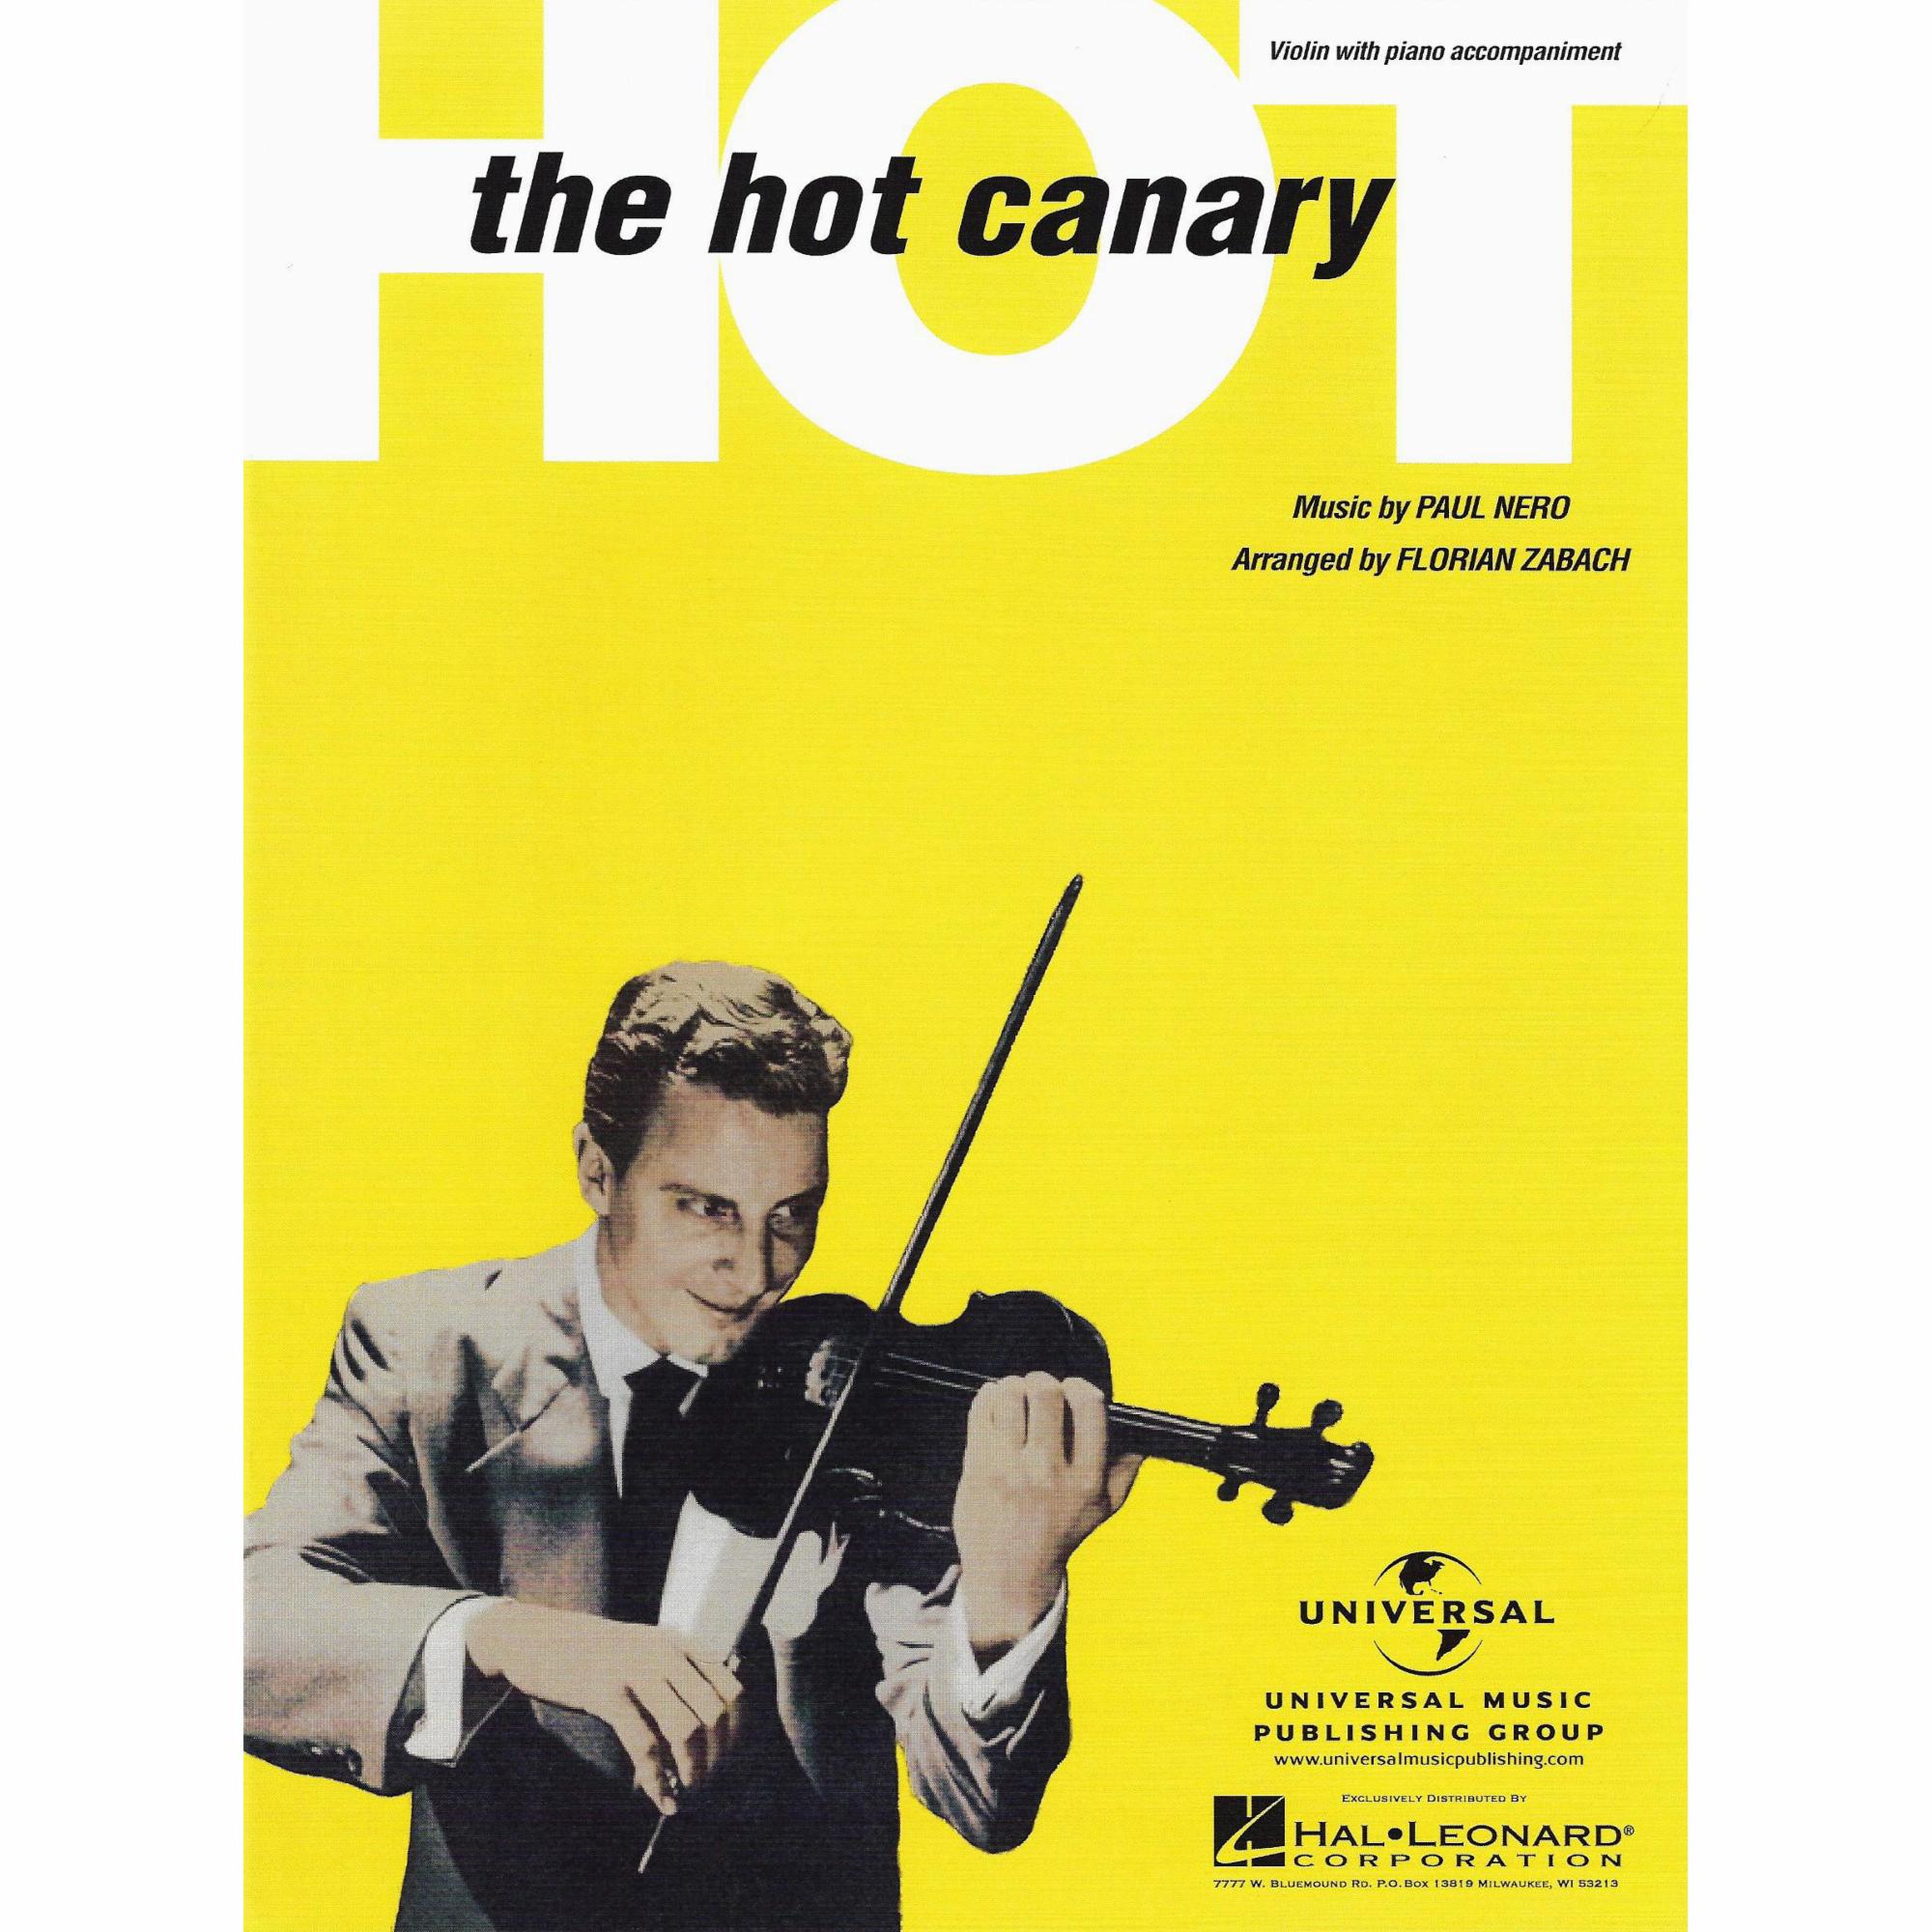 The Hot Canary for Violin and Piano